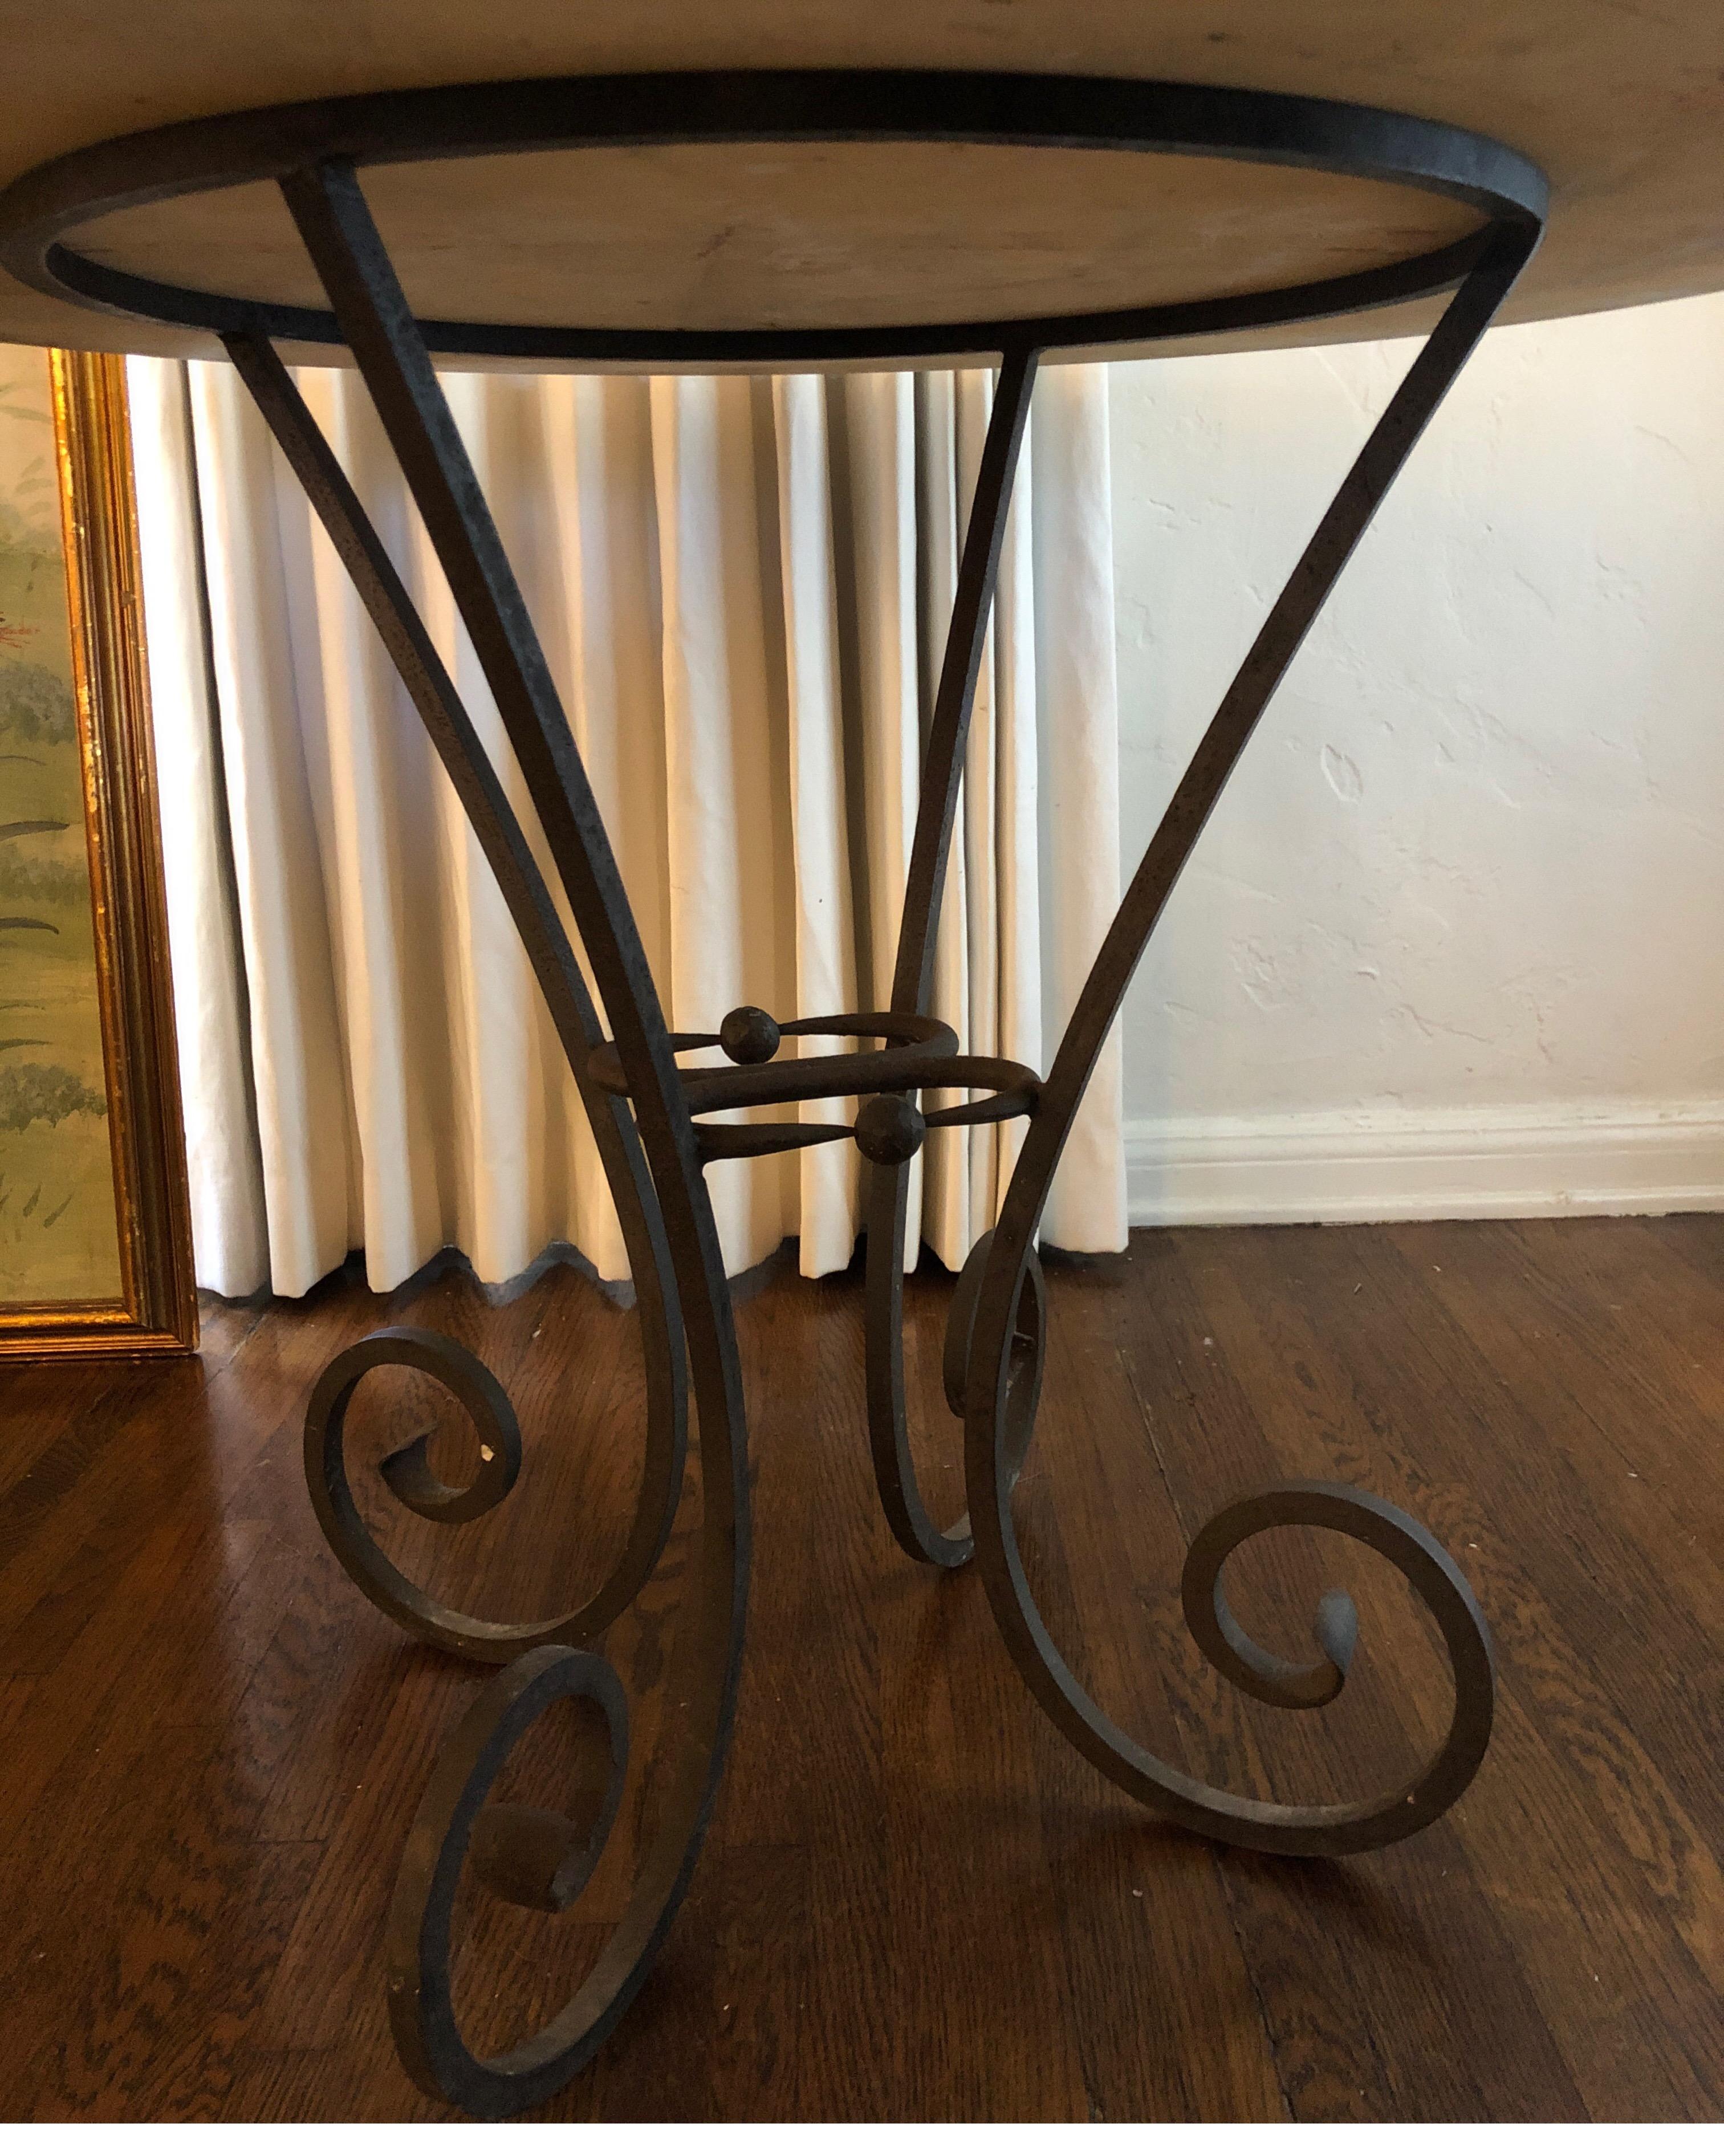 Antique hand forged Spanish iron table base with white marble top.
4 curved legs and two unique turned iron with two balls in the center. 

White Carrara marble measuring 42